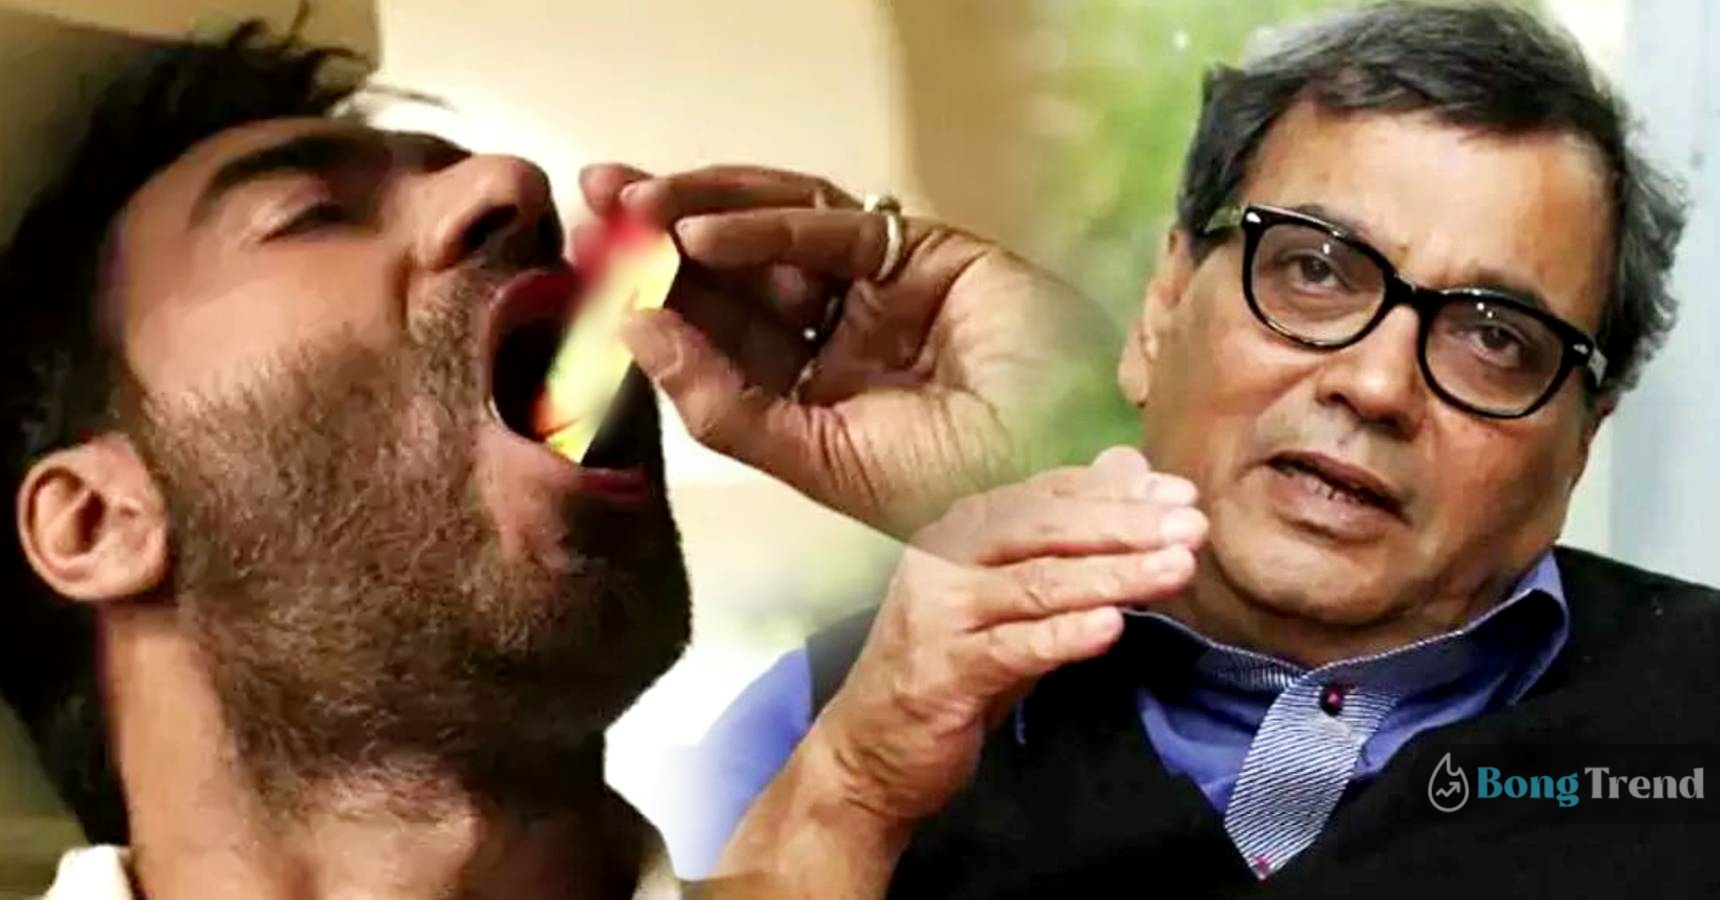 Famous Bollywood director Subhash Ghai takes a dig at today’s Bollywood actor